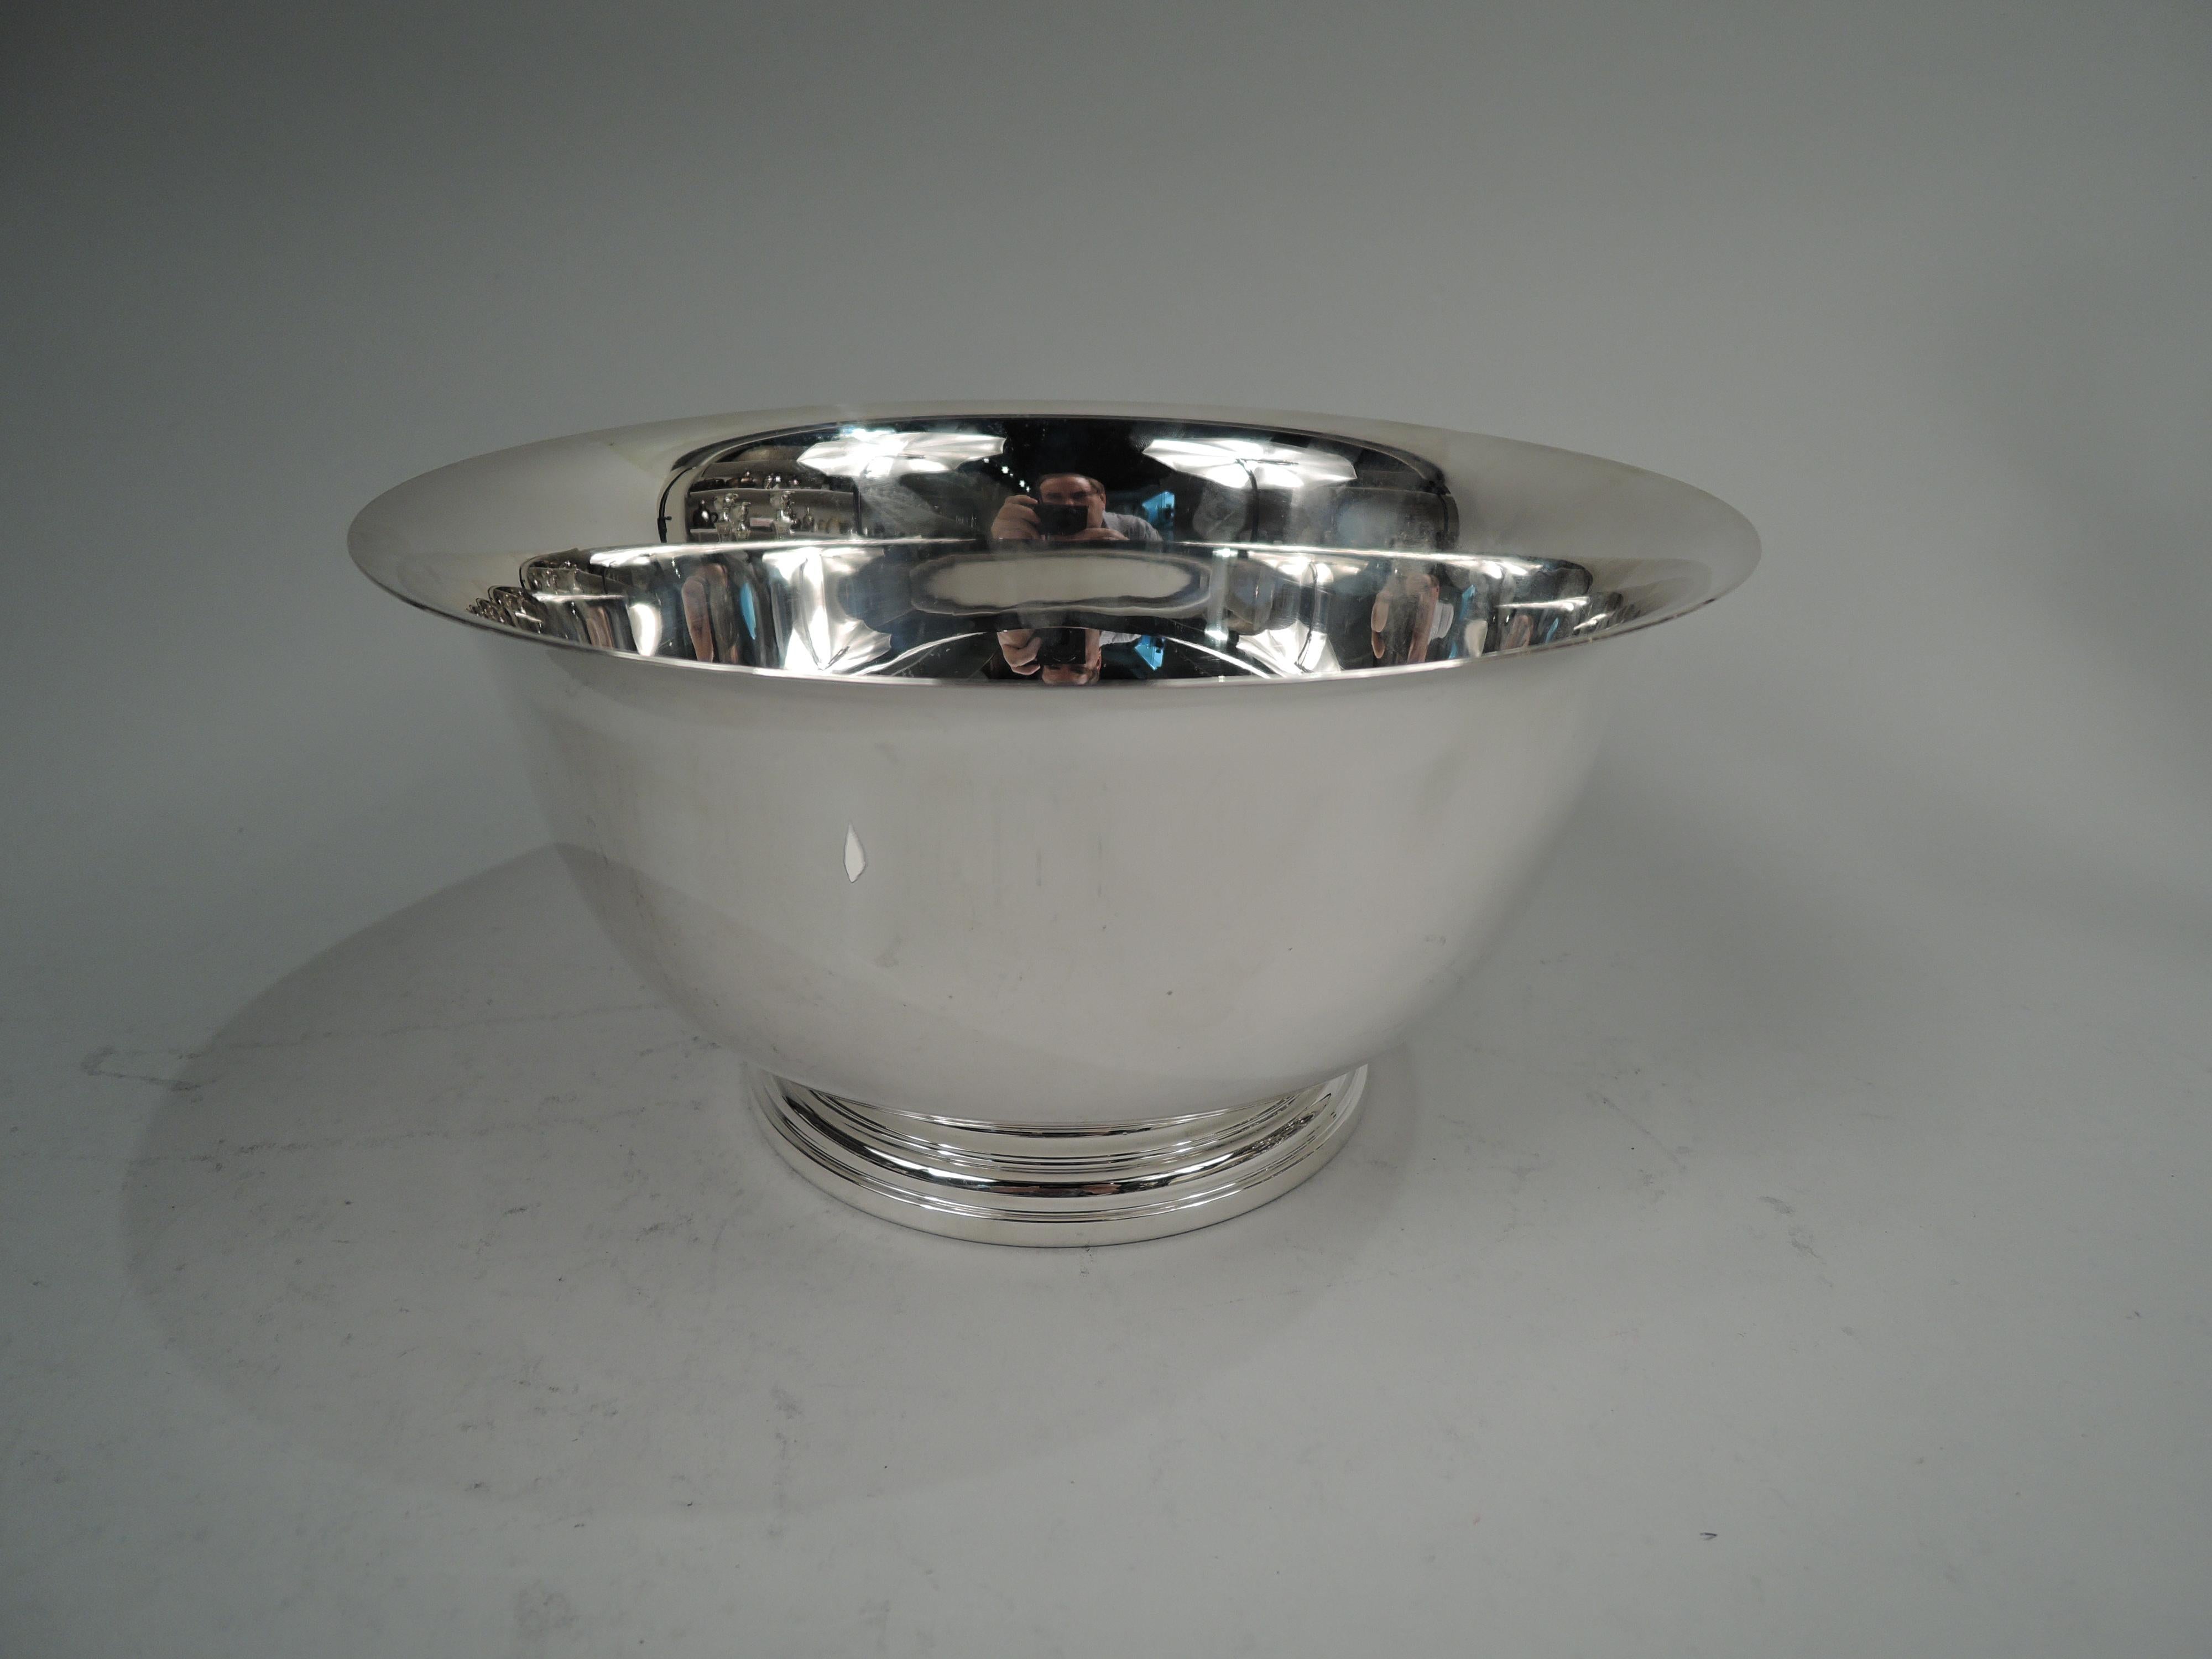 American Colonial sterling silver bowl, ca 1960, Retailed by Cartier in New York. Traditional Revere form with flared rim, curved bottom, and stepped foot. Marked “Cartier / Sterling / A Paul Revere / Reproduction / 9169”. Weight: 15.6 troy ounces.